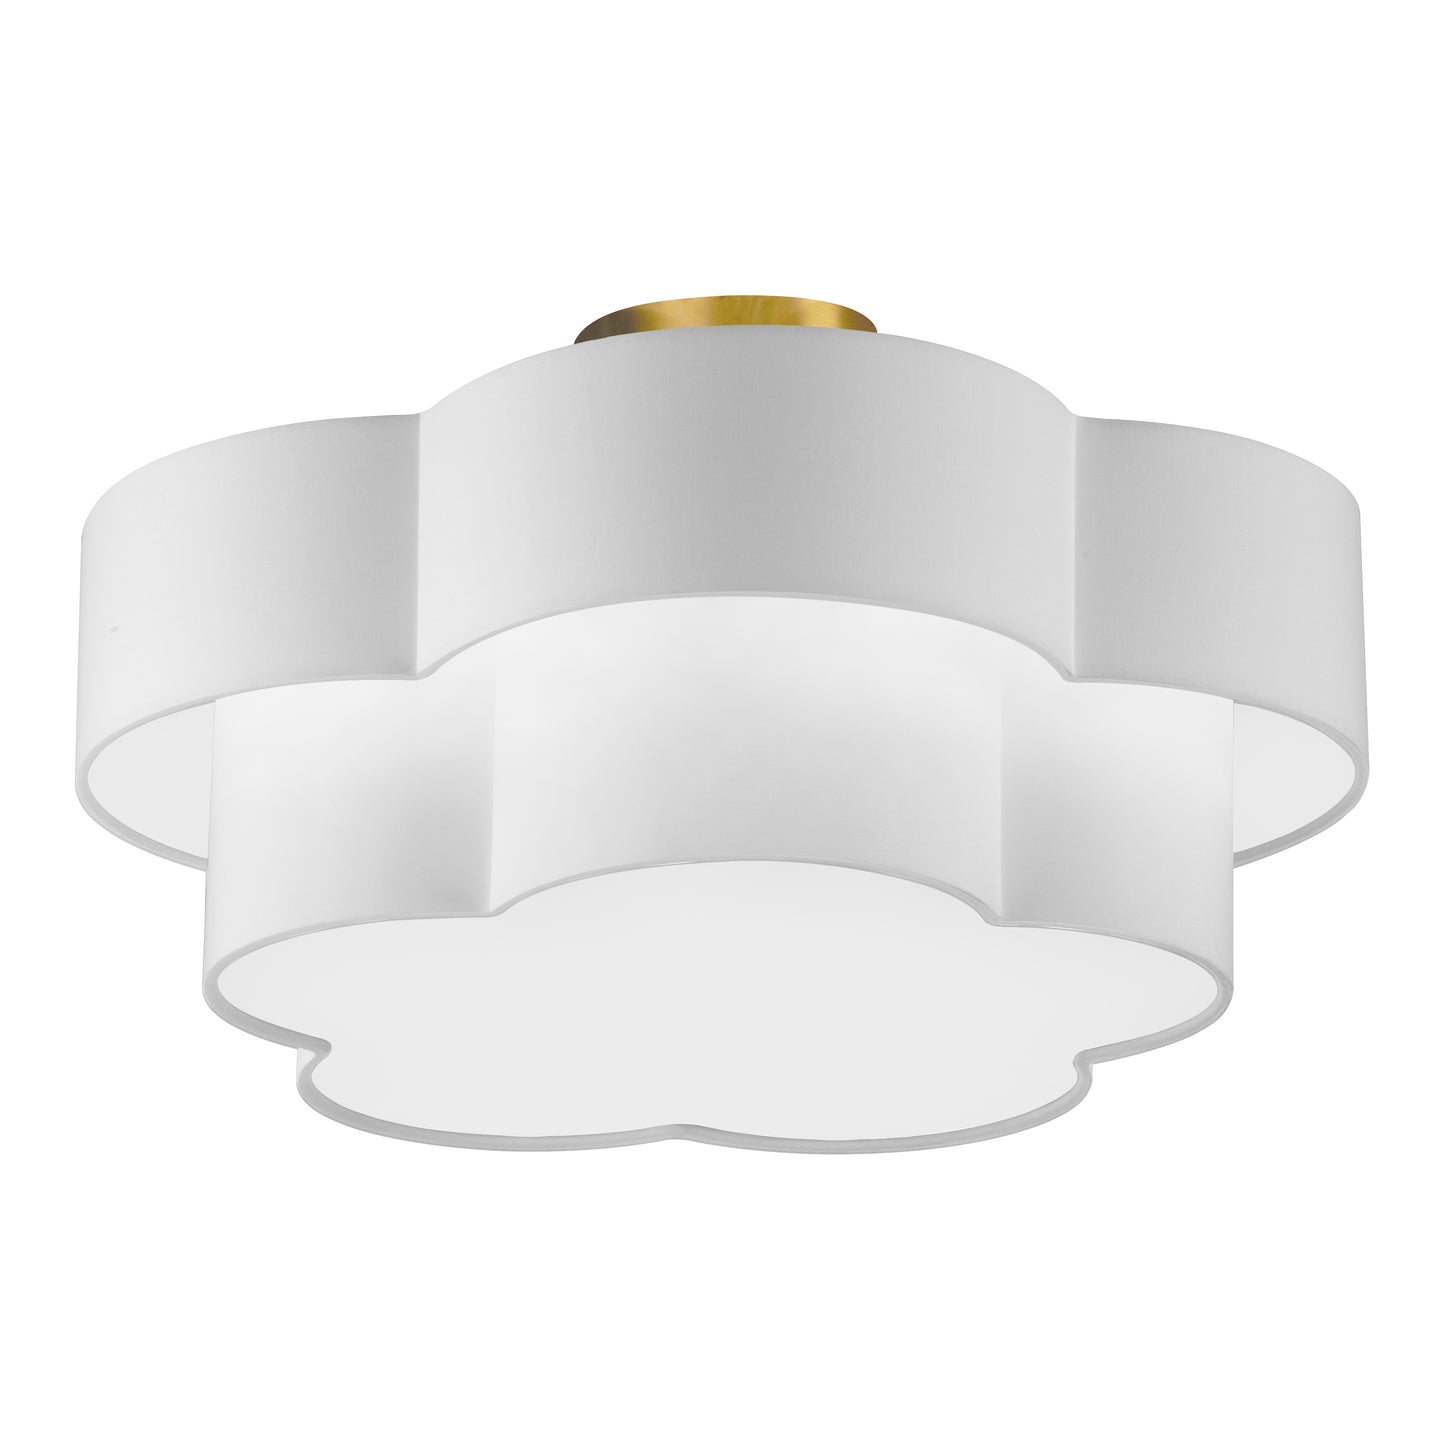 Dainolite PLX-203FH-AGB-WH 3 Light Incandescent Flush Mount, Aged Brass with White Shade